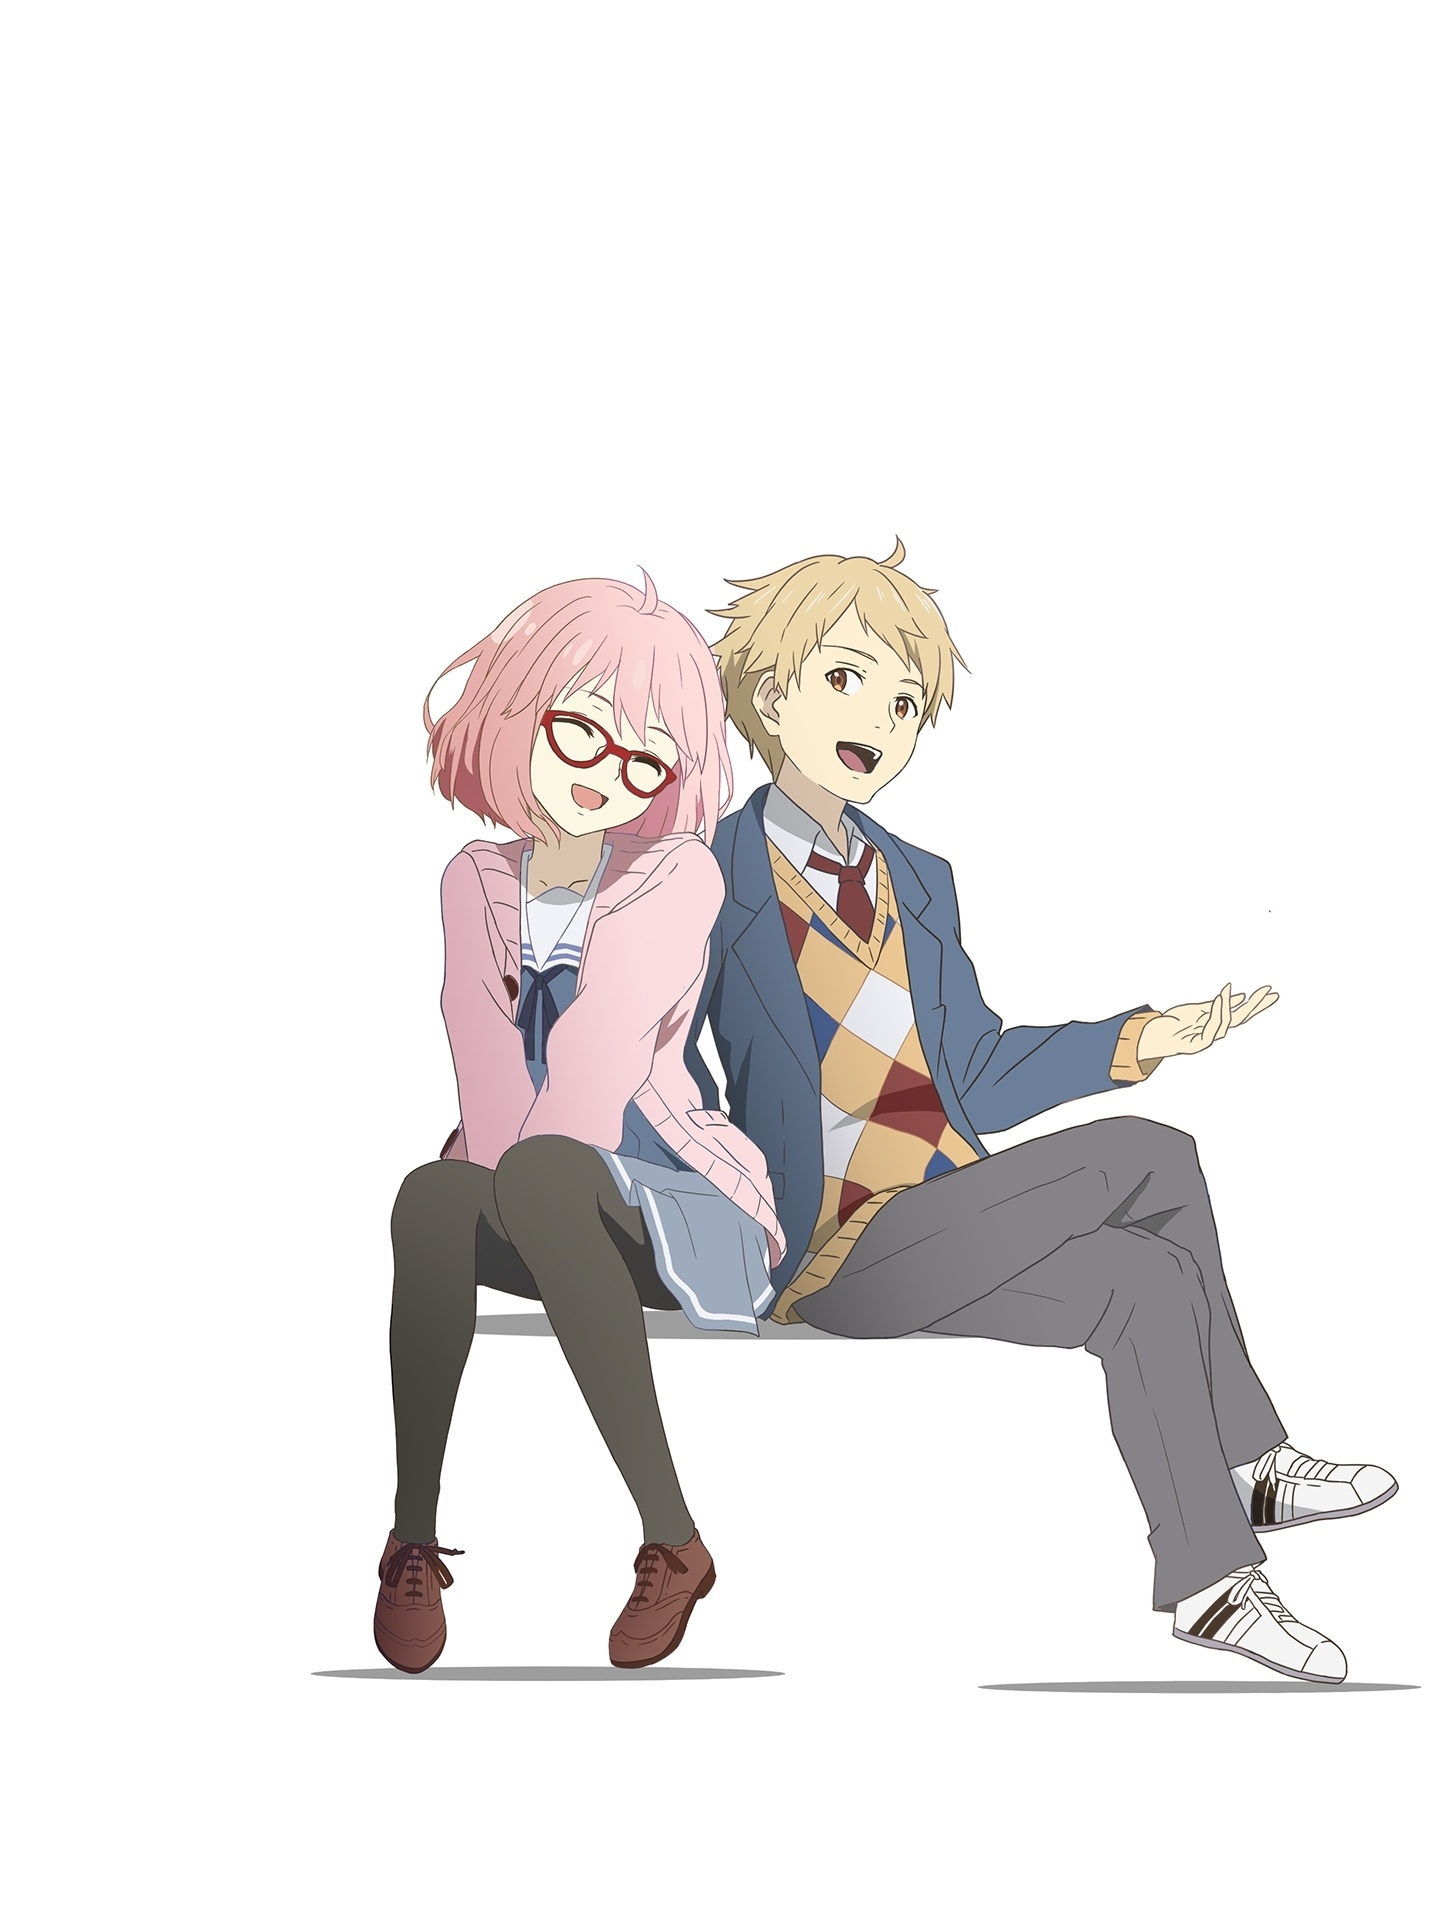 Beyond the Boundary Wallpaper Download